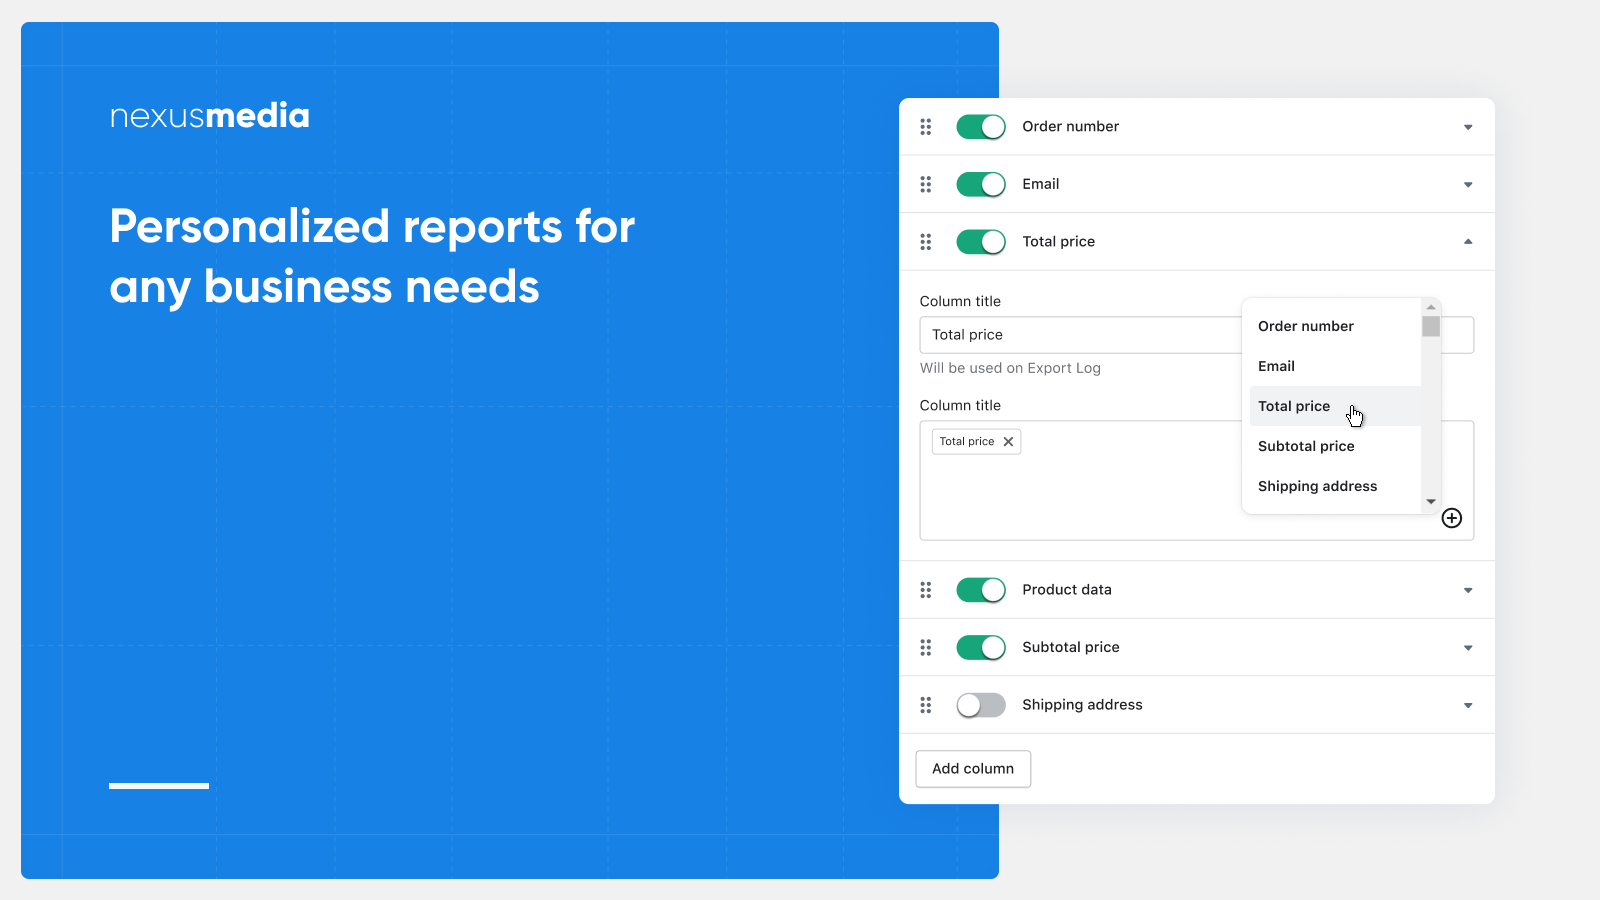 Personalized reports for your business needs